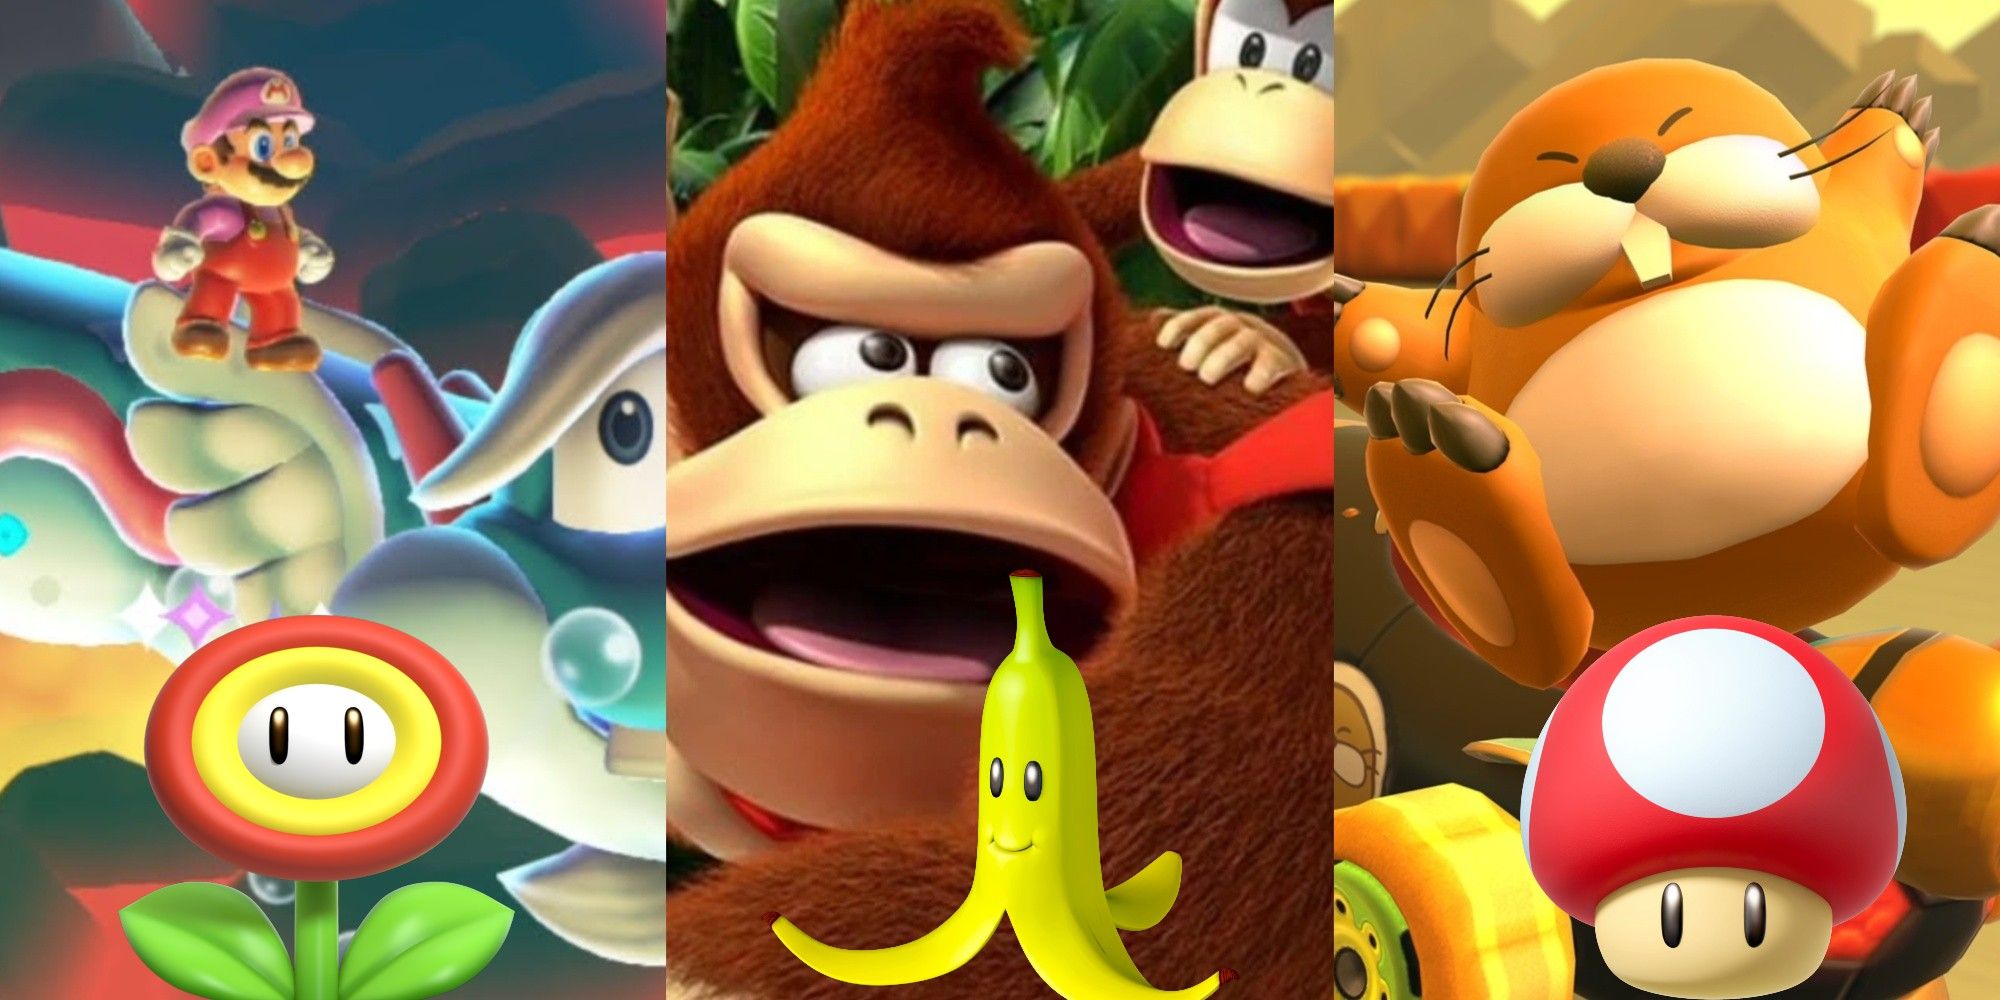 Collage image of Mario, Donkey Kong, and a beaver.